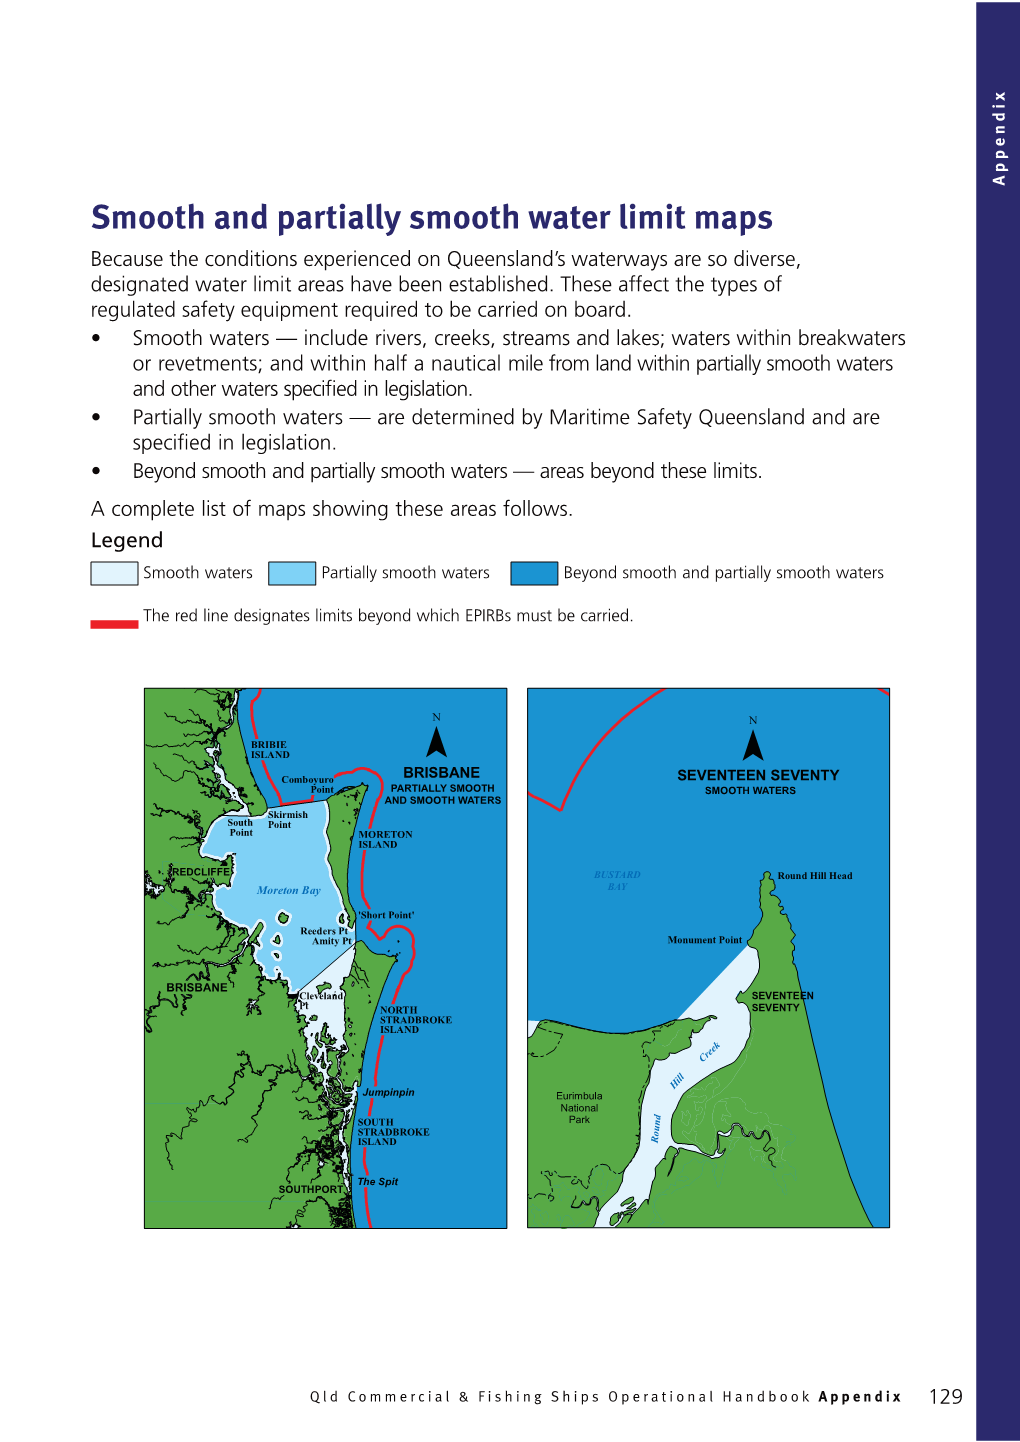 Queensland Commercial and Fishing Ships Operational Handbook, Second Edition – Water Limit Maps